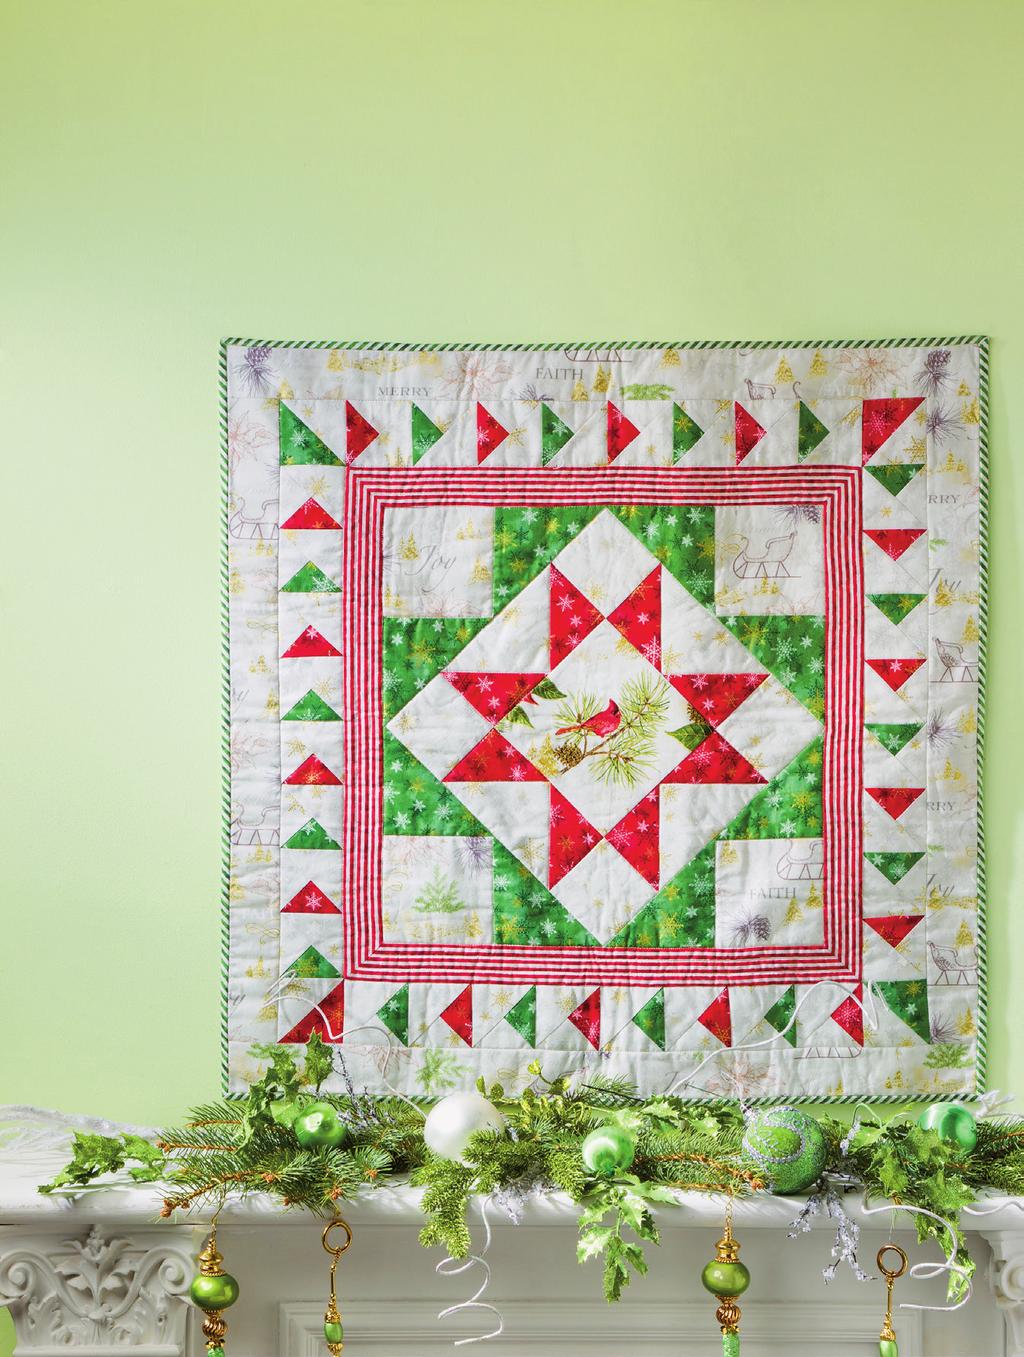 An Annie s Publication JUMP-START YOUR HOLIDAY QUILTING Autumn 2014 QuiltersWorld.